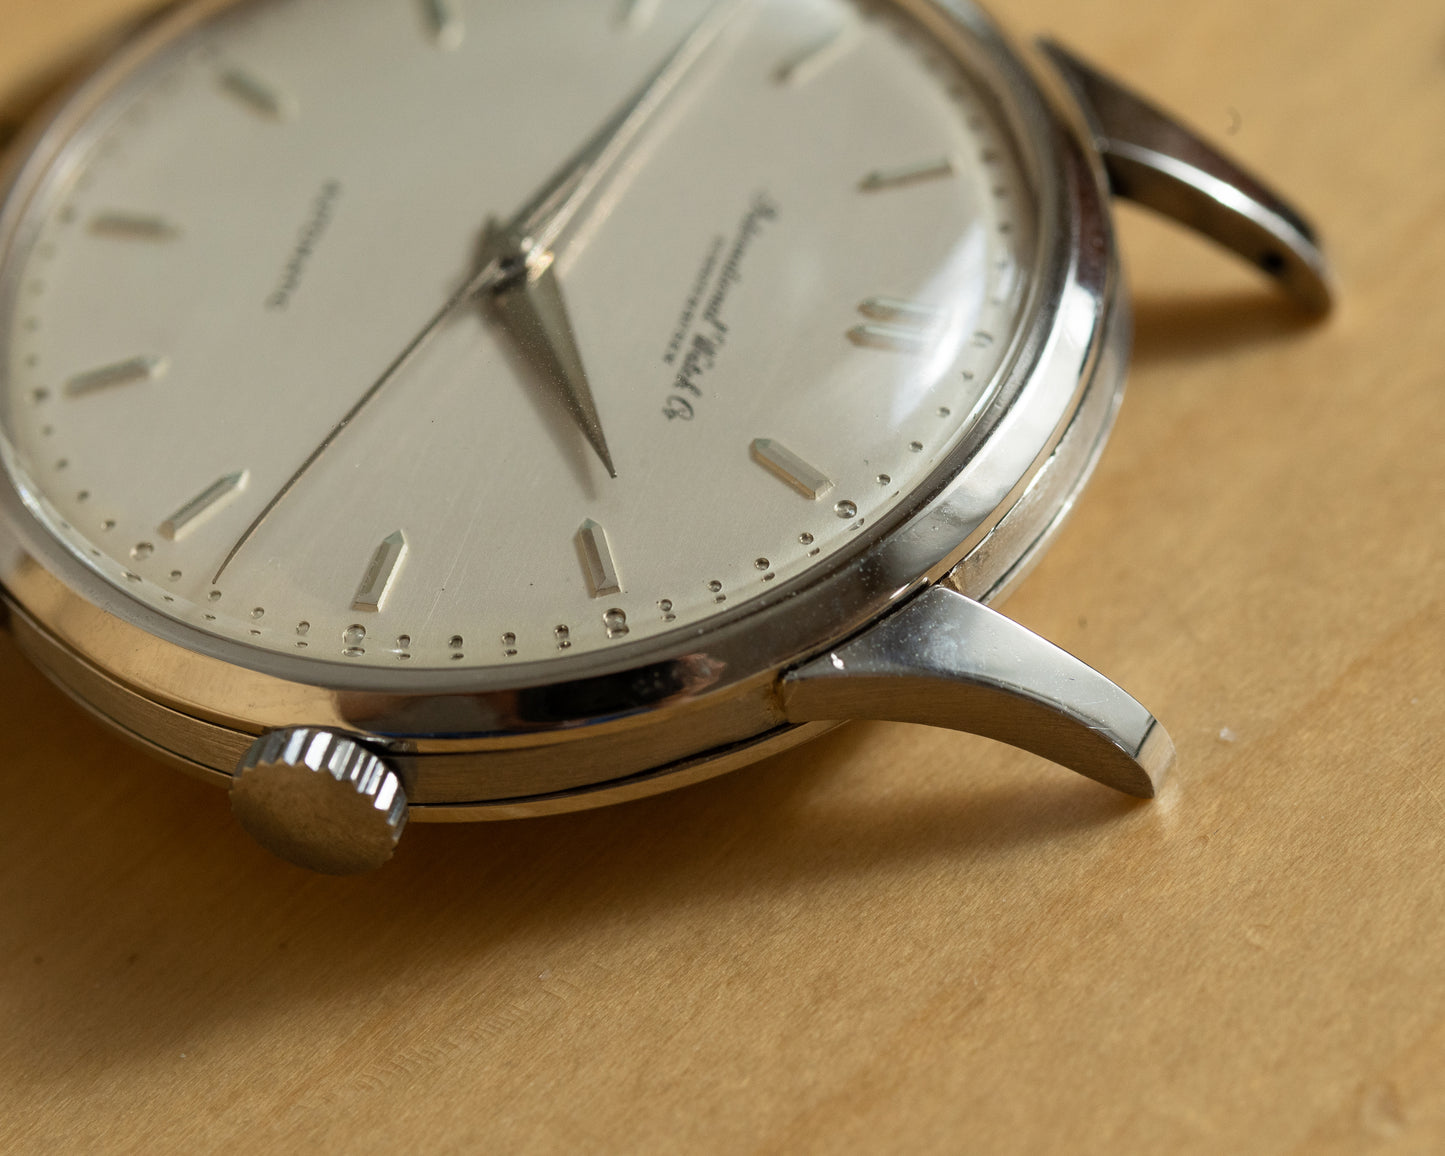 IWC dress watch in Platinum, cal. 853 from early 1960's